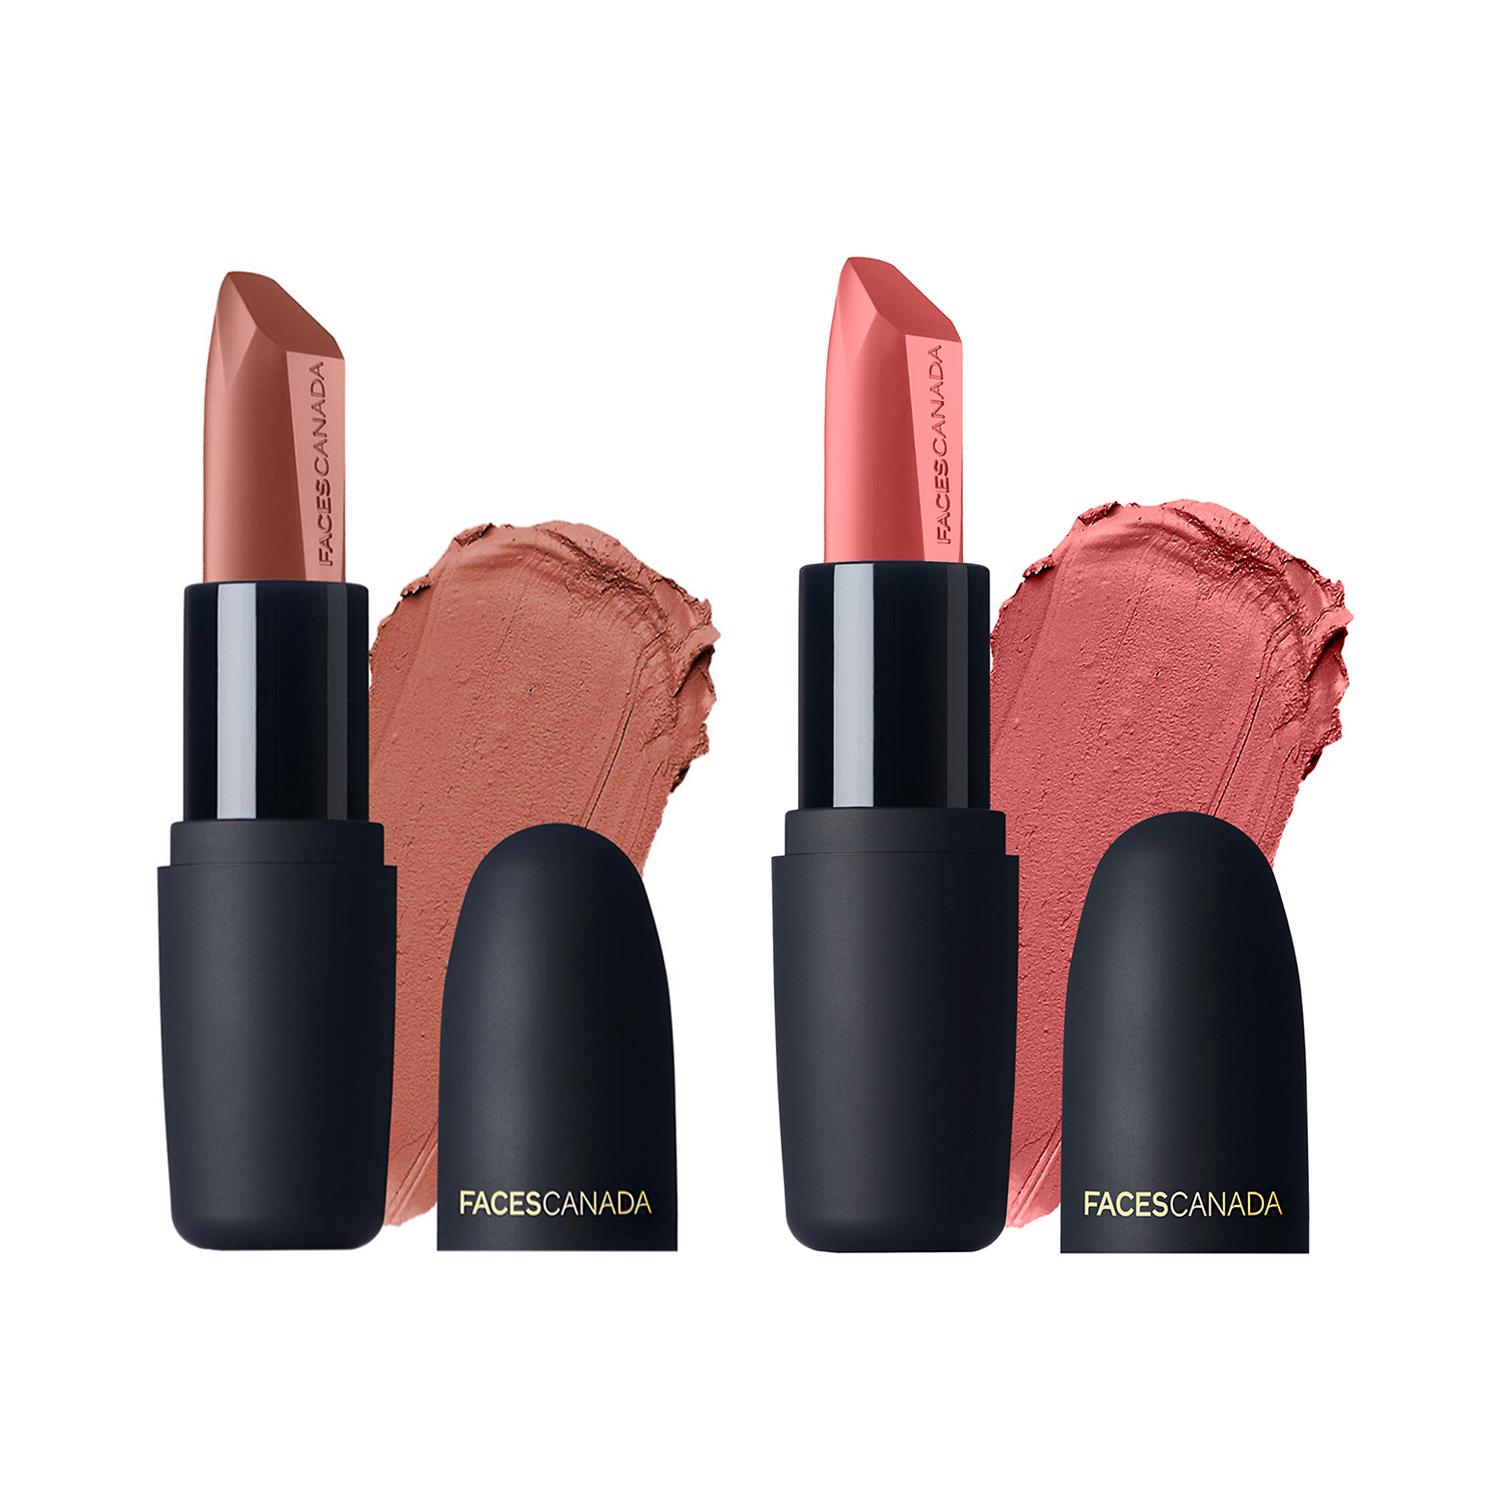 Faces Canada | Faces Canada Festive Glam Weightless Matte Lipstick Combo Pack - Buff Nude, Peach Candy (2pcs)